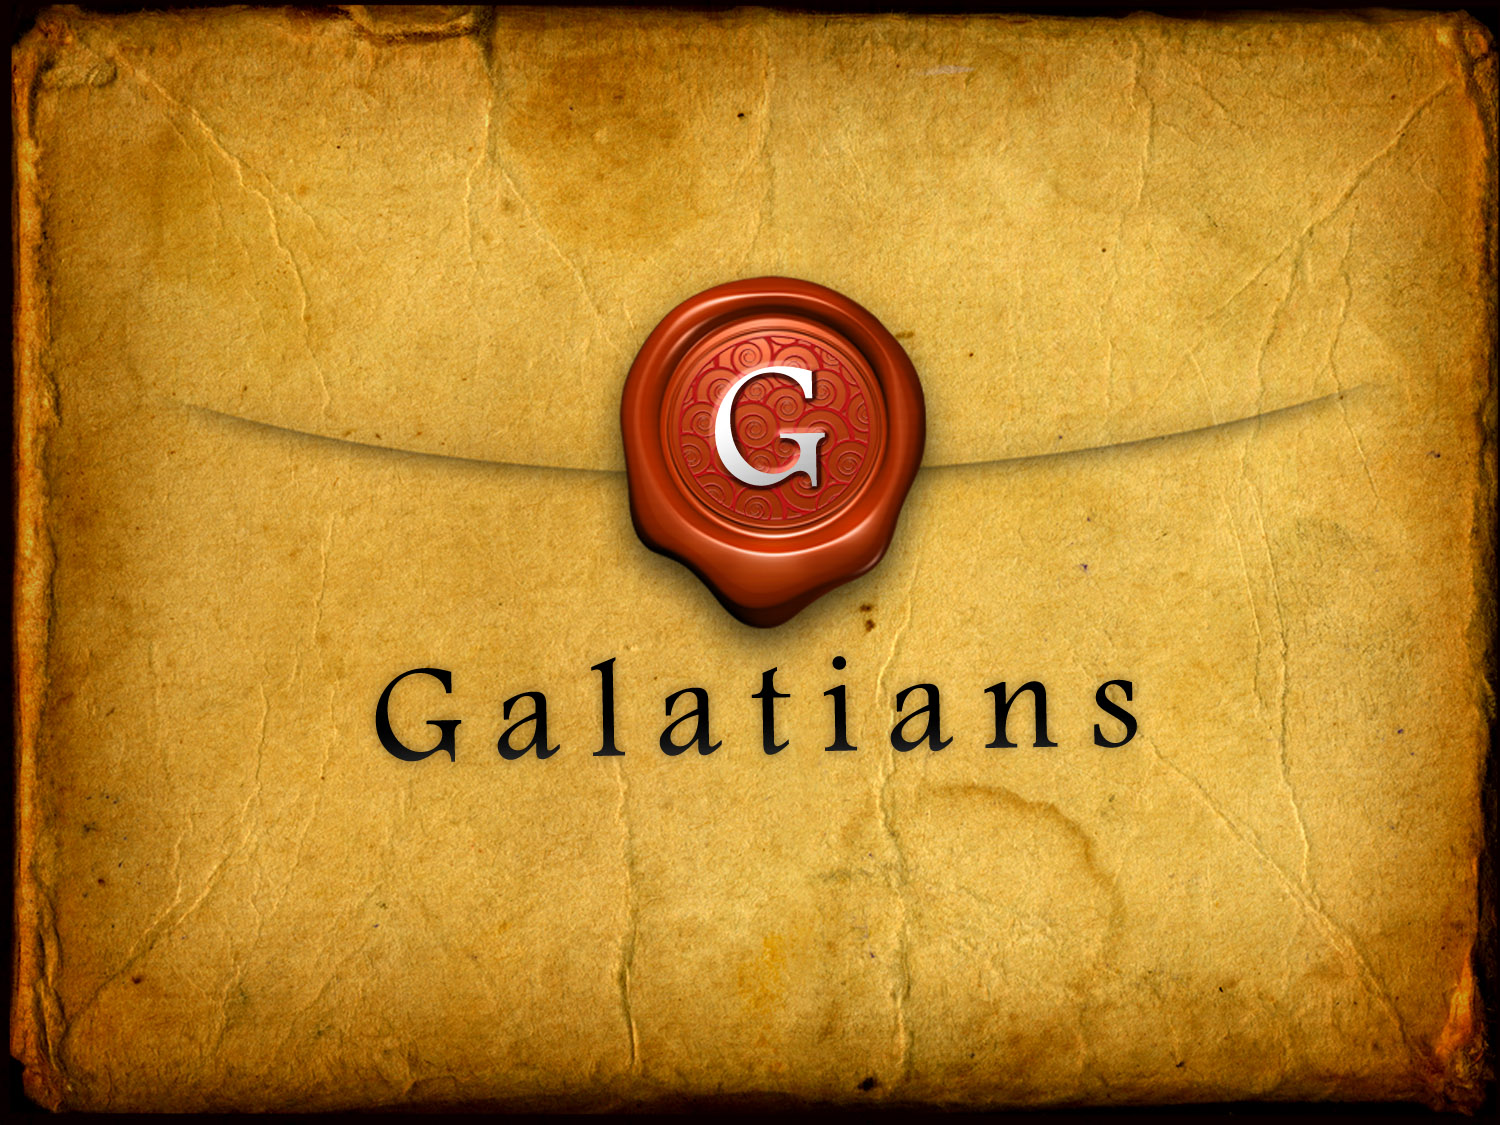 The Book of Galatians 1:13-17